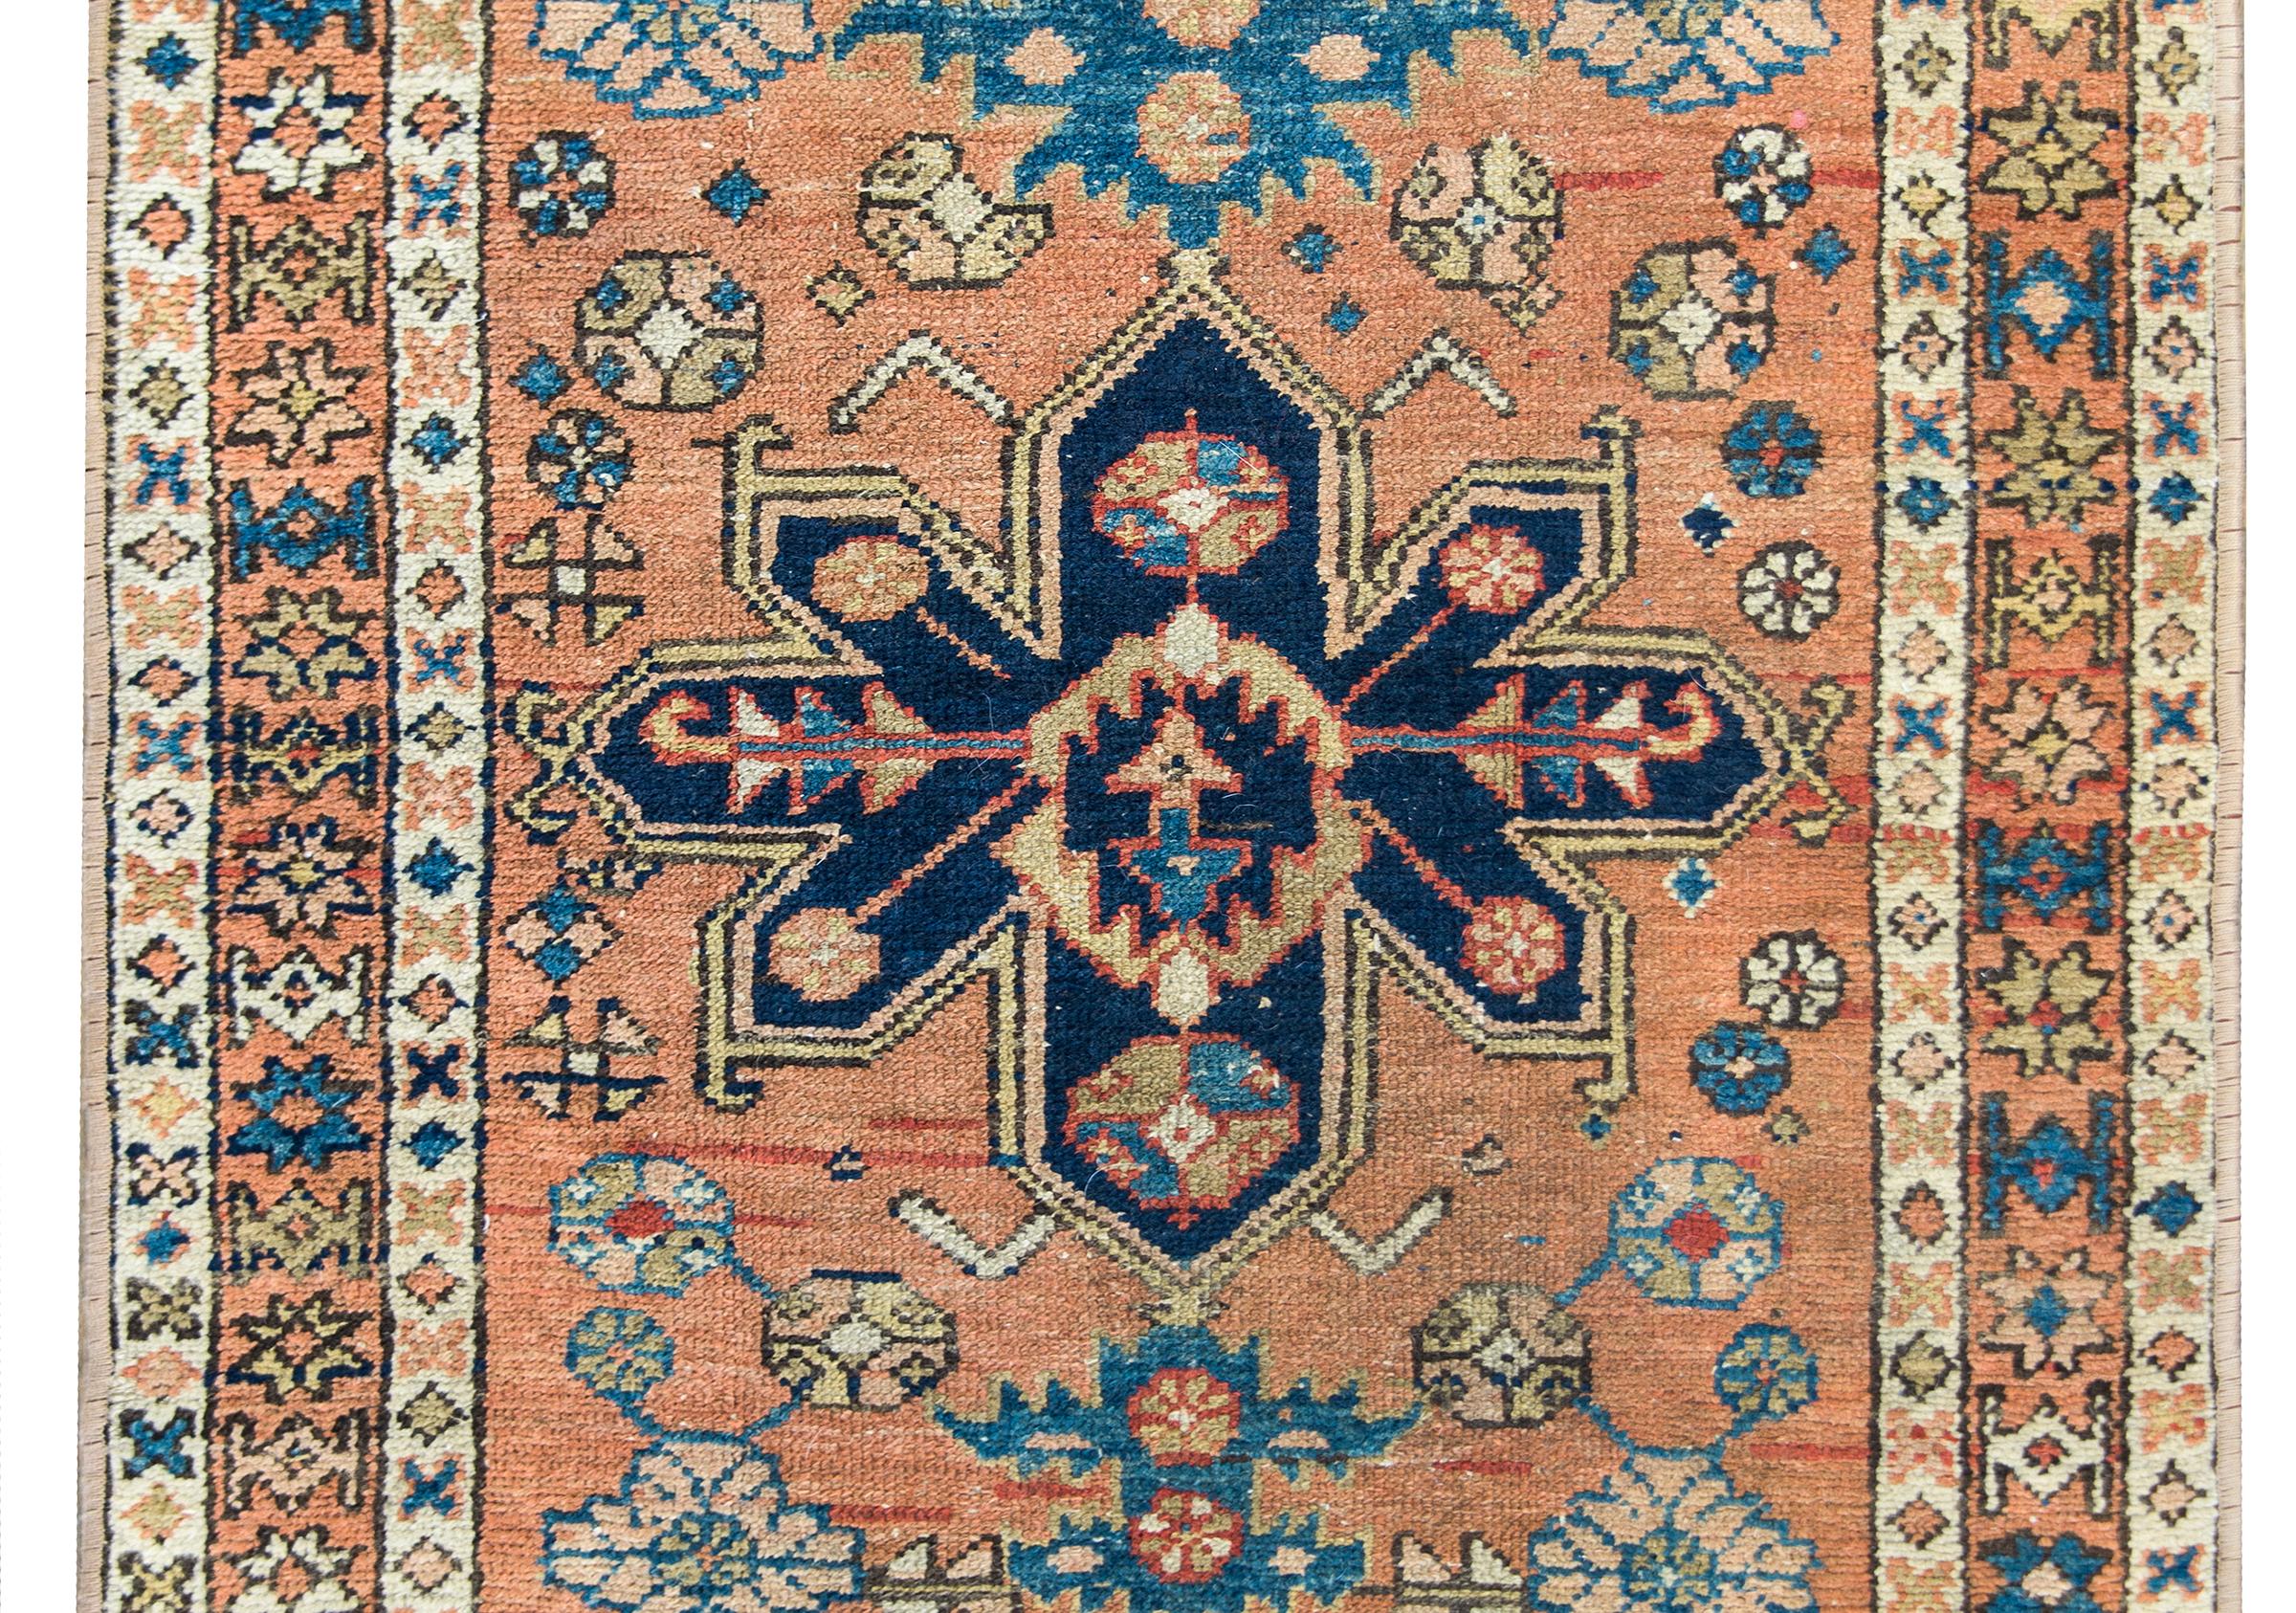 A beautiful early 20th century Persian Karadja rug with a stylized floral medallion living amidst a field of more stylized flowers and leaves, surrounded by a simple border of petite repeated stylized flowers, and all woven in indigo, gold, crimson,